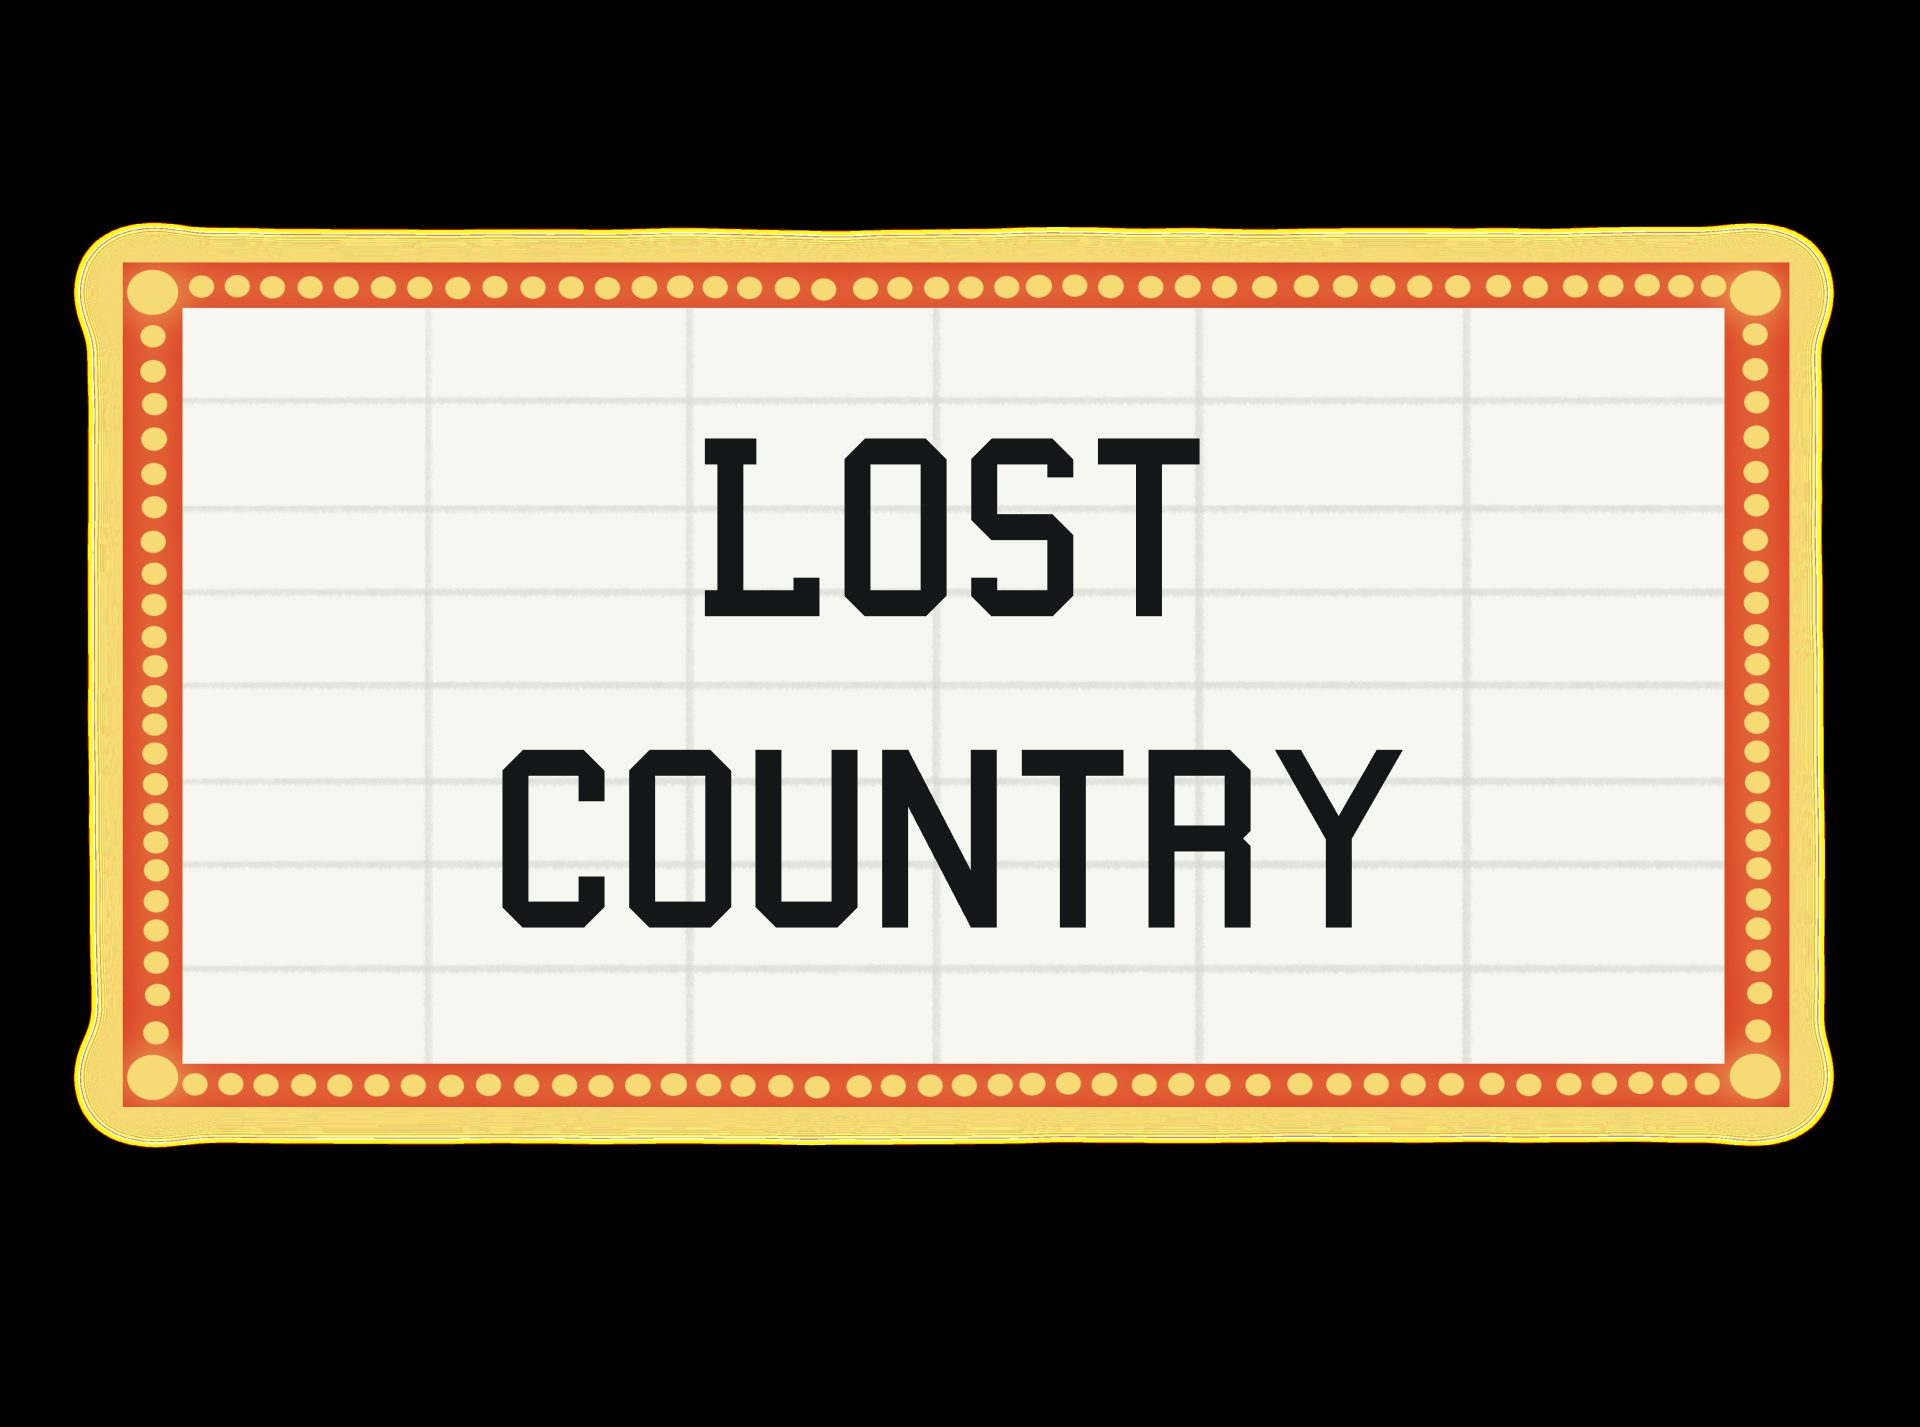 “Lost Country”: Politics and family come together in a story built on social unrest